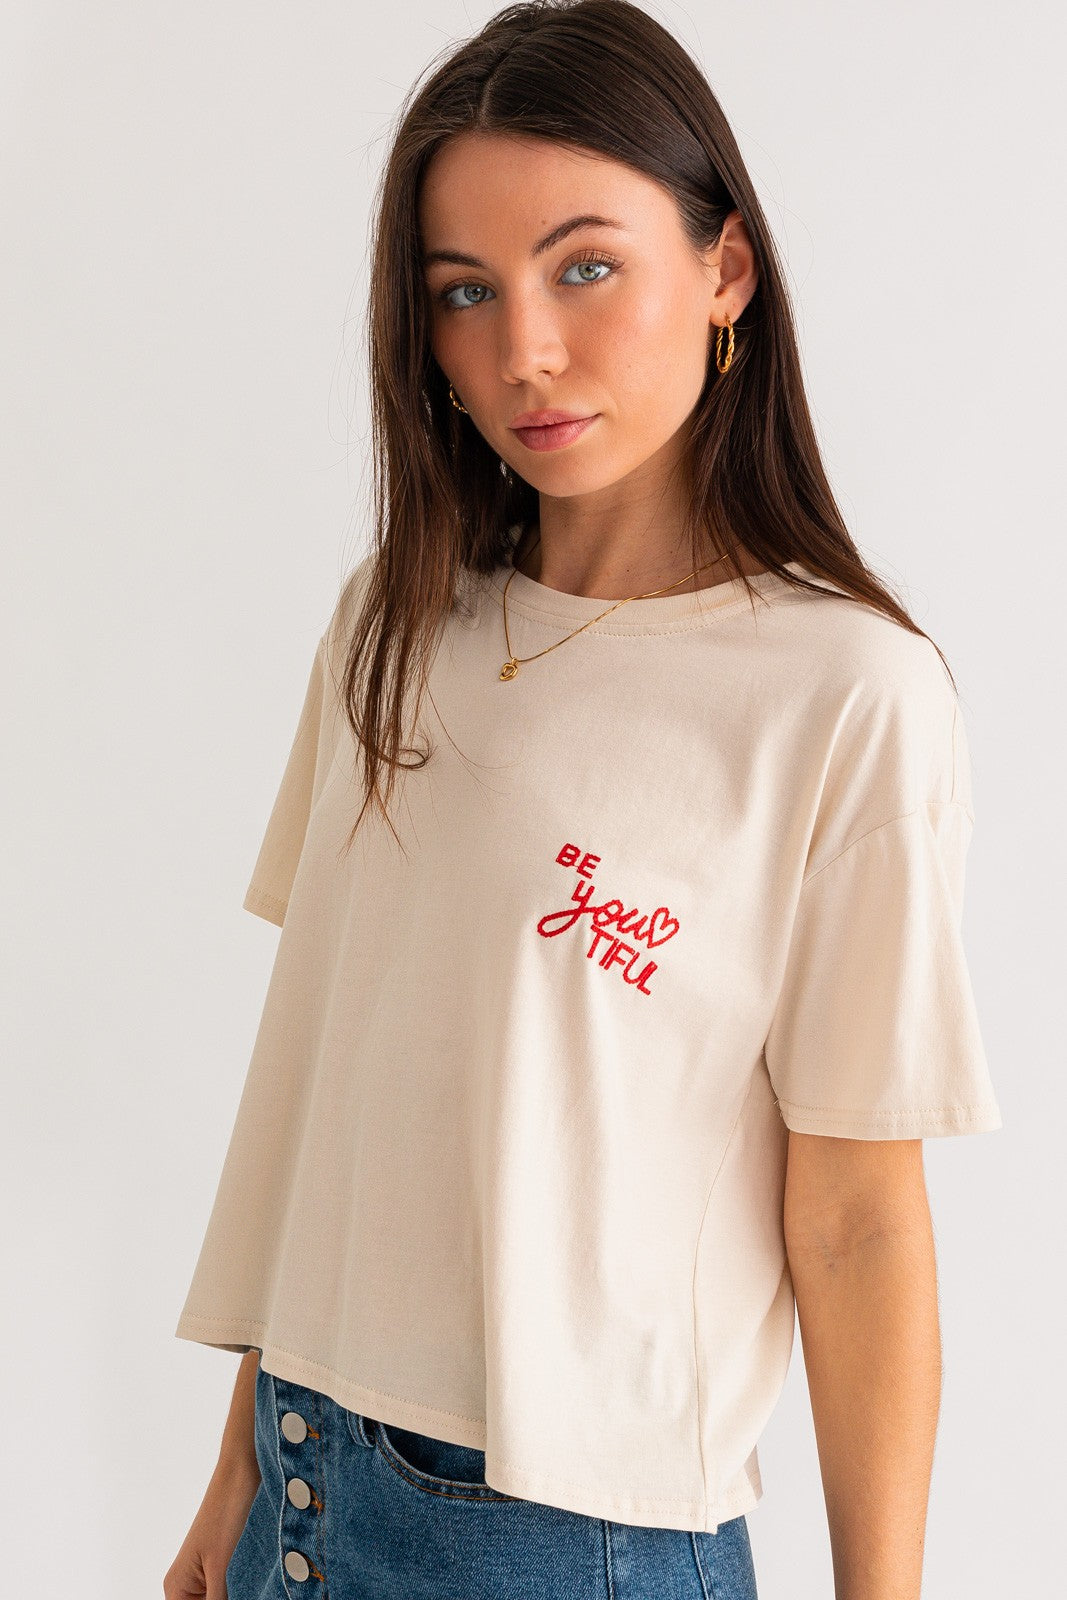 
                  
                    BE YOUTIFUL EMBROIDERY T-SHIRT
                  
                